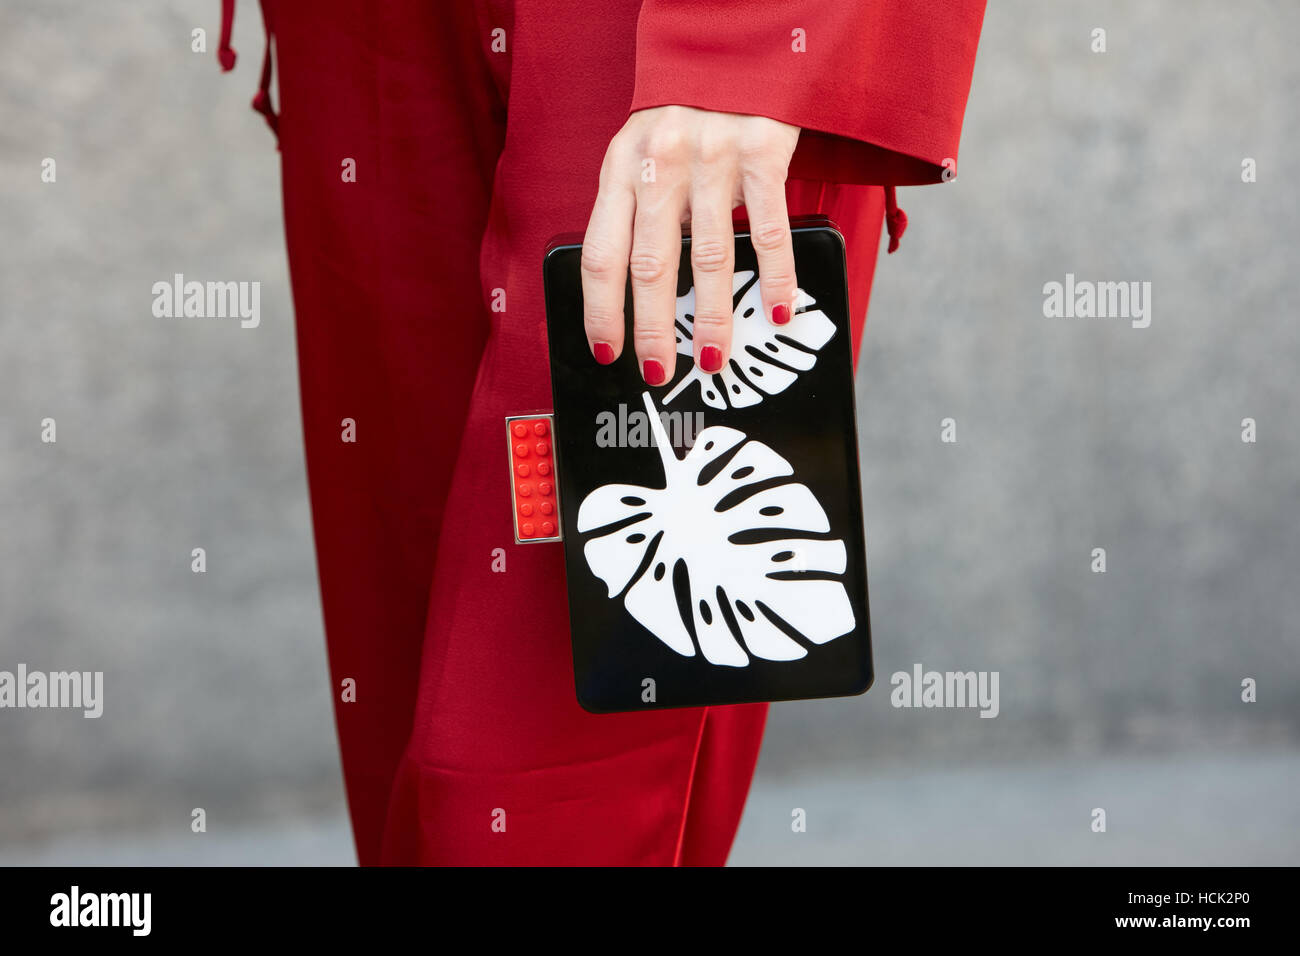 Woman with black bag with white leaves design and red Lego detail before Salvatore Ferragamo fashion show, Milan Fashion Week. Stock Photo